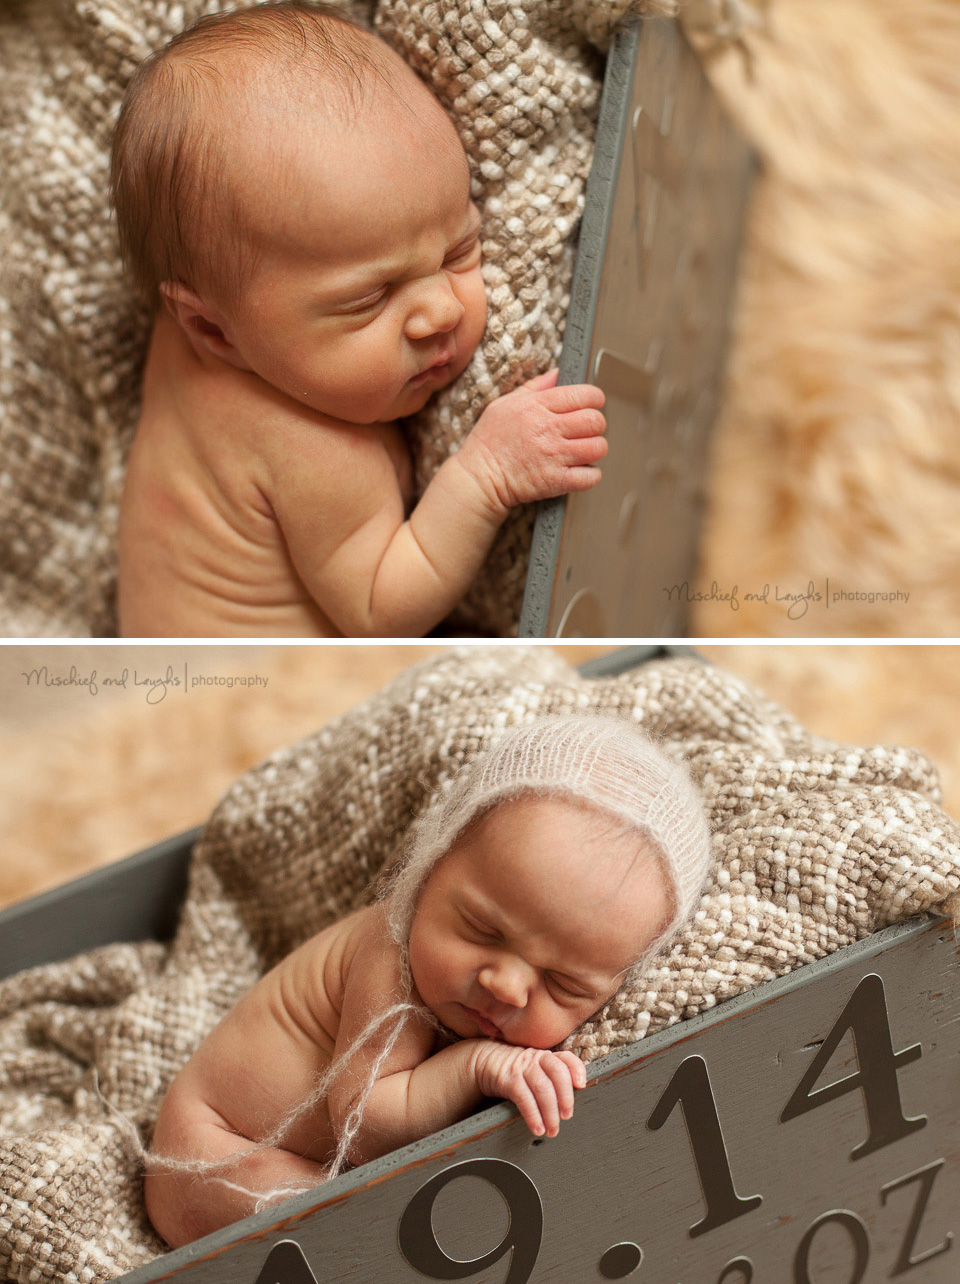 Newborn Photography. Mischief and Laughs Photography, Cincinnati OH